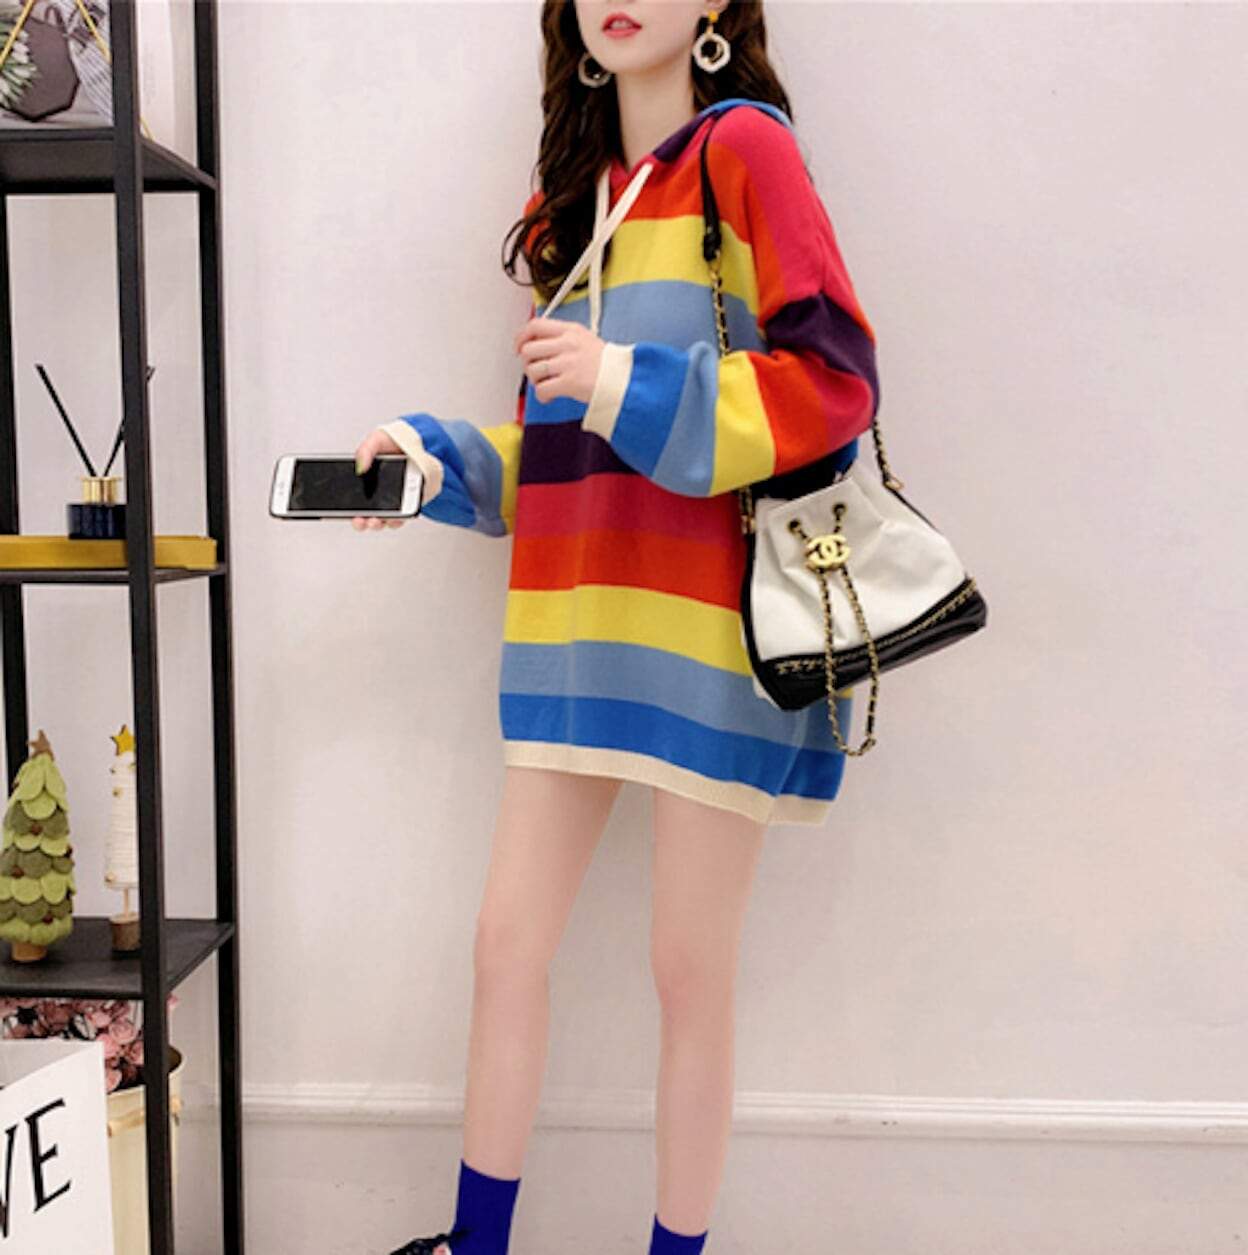 Womens Multi Color Striped Hooded  Sweater